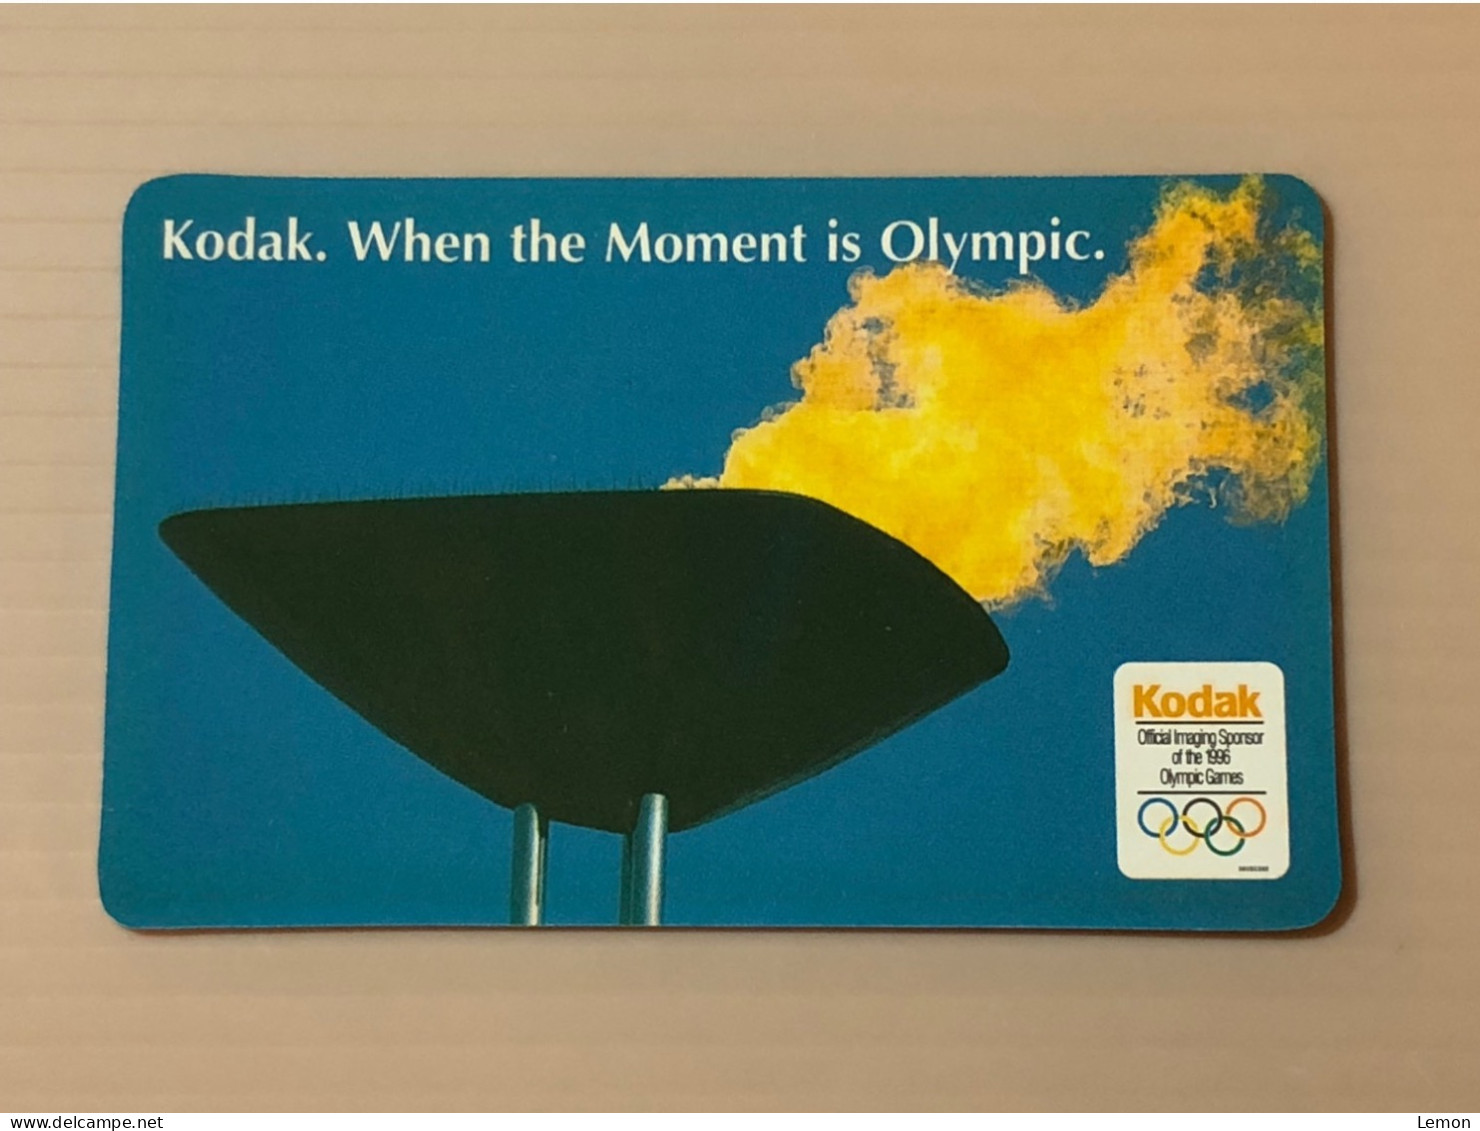 Mint USA UNITED STATES America Prepaid Telecard Phonecard, KODAK Sponsor Of 1996 Olympic SAMPLE CARD, Set Of 1 Mint Card - Collections